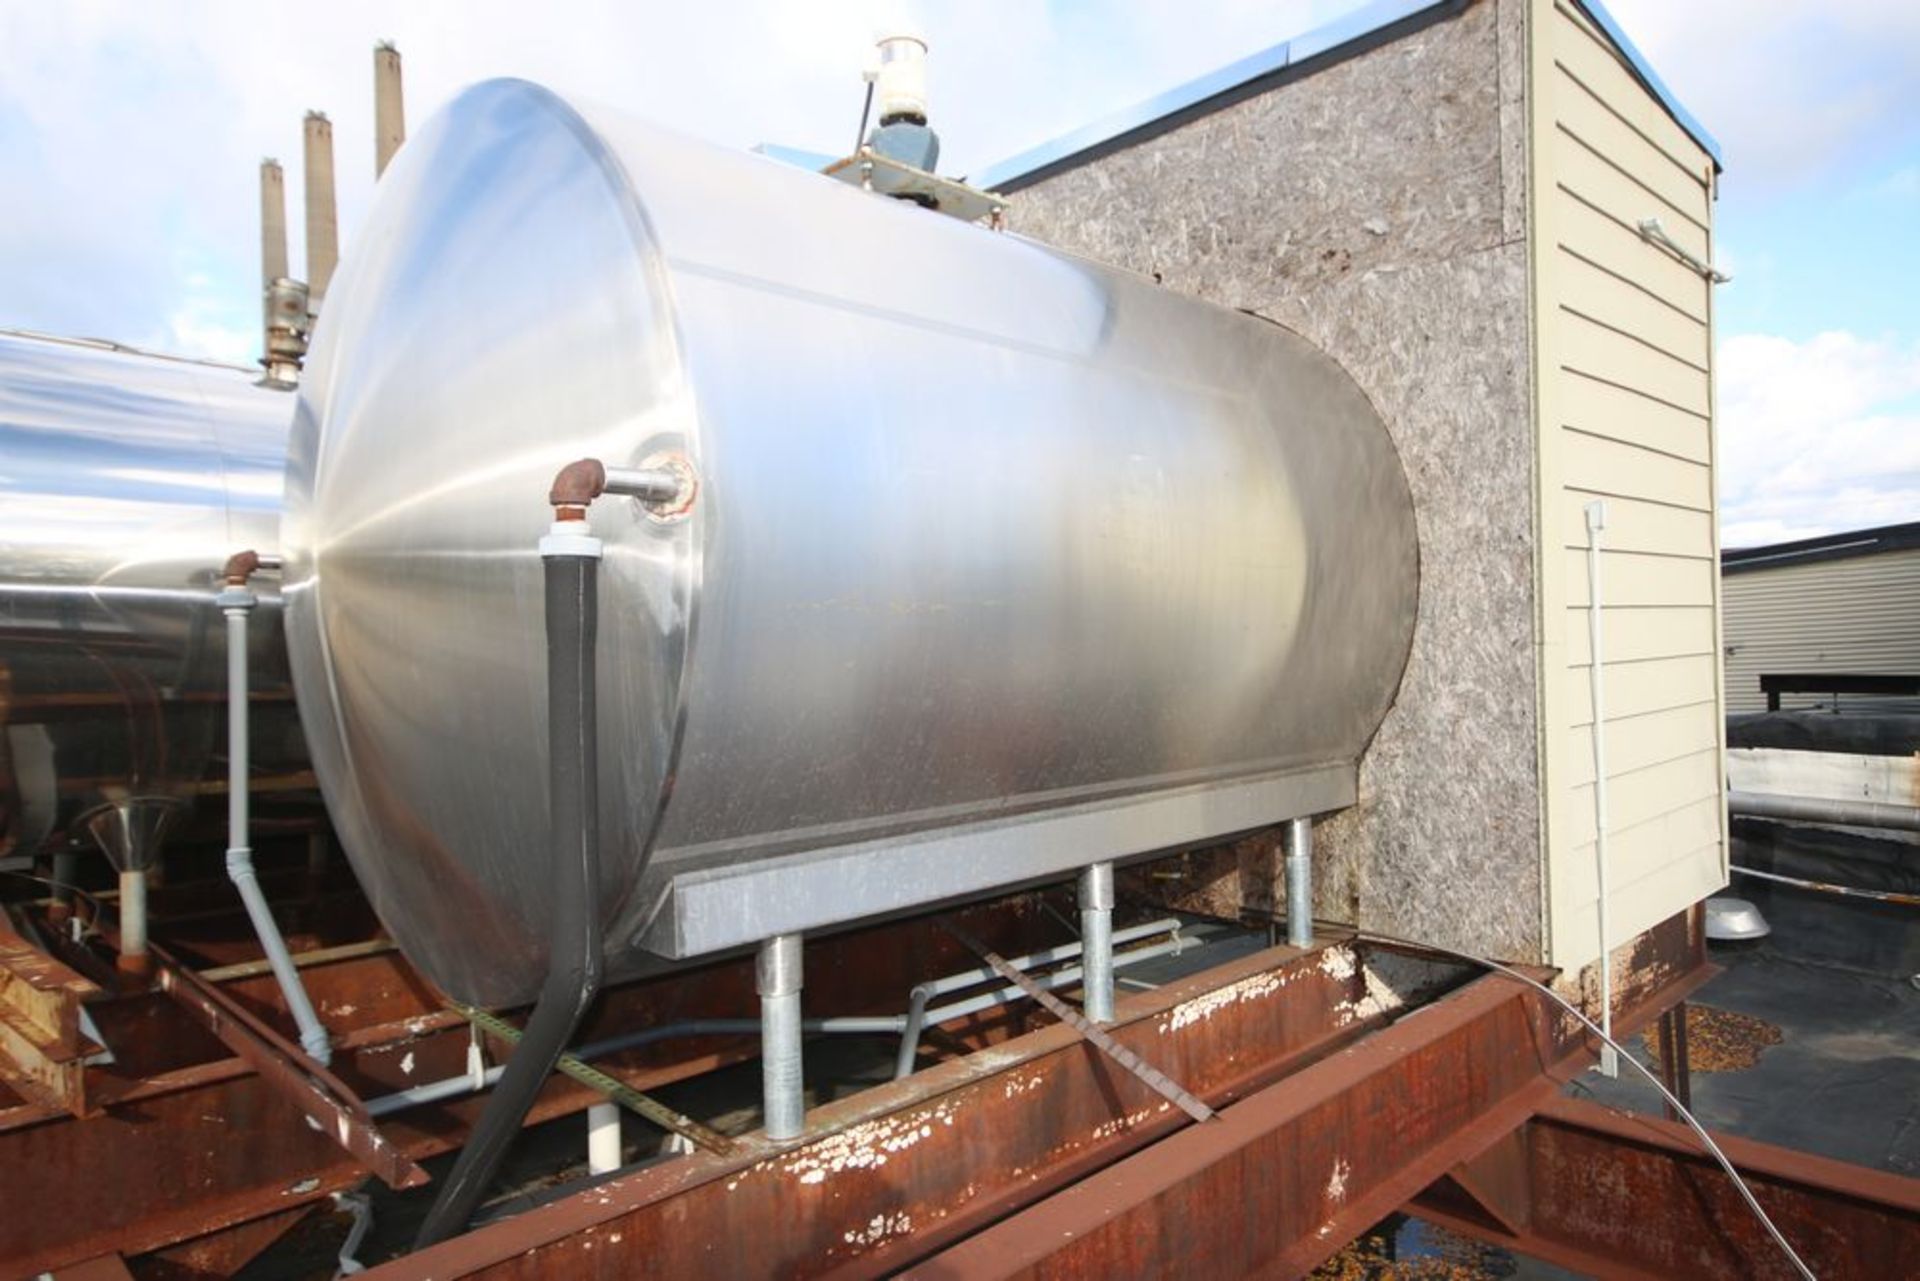 Cherry-Burrel 3,000 Gal. Jacketed Horizontal Tank, with Dual S/S Spray Ball, with Quad Prop Veritcal - Image 6 of 16